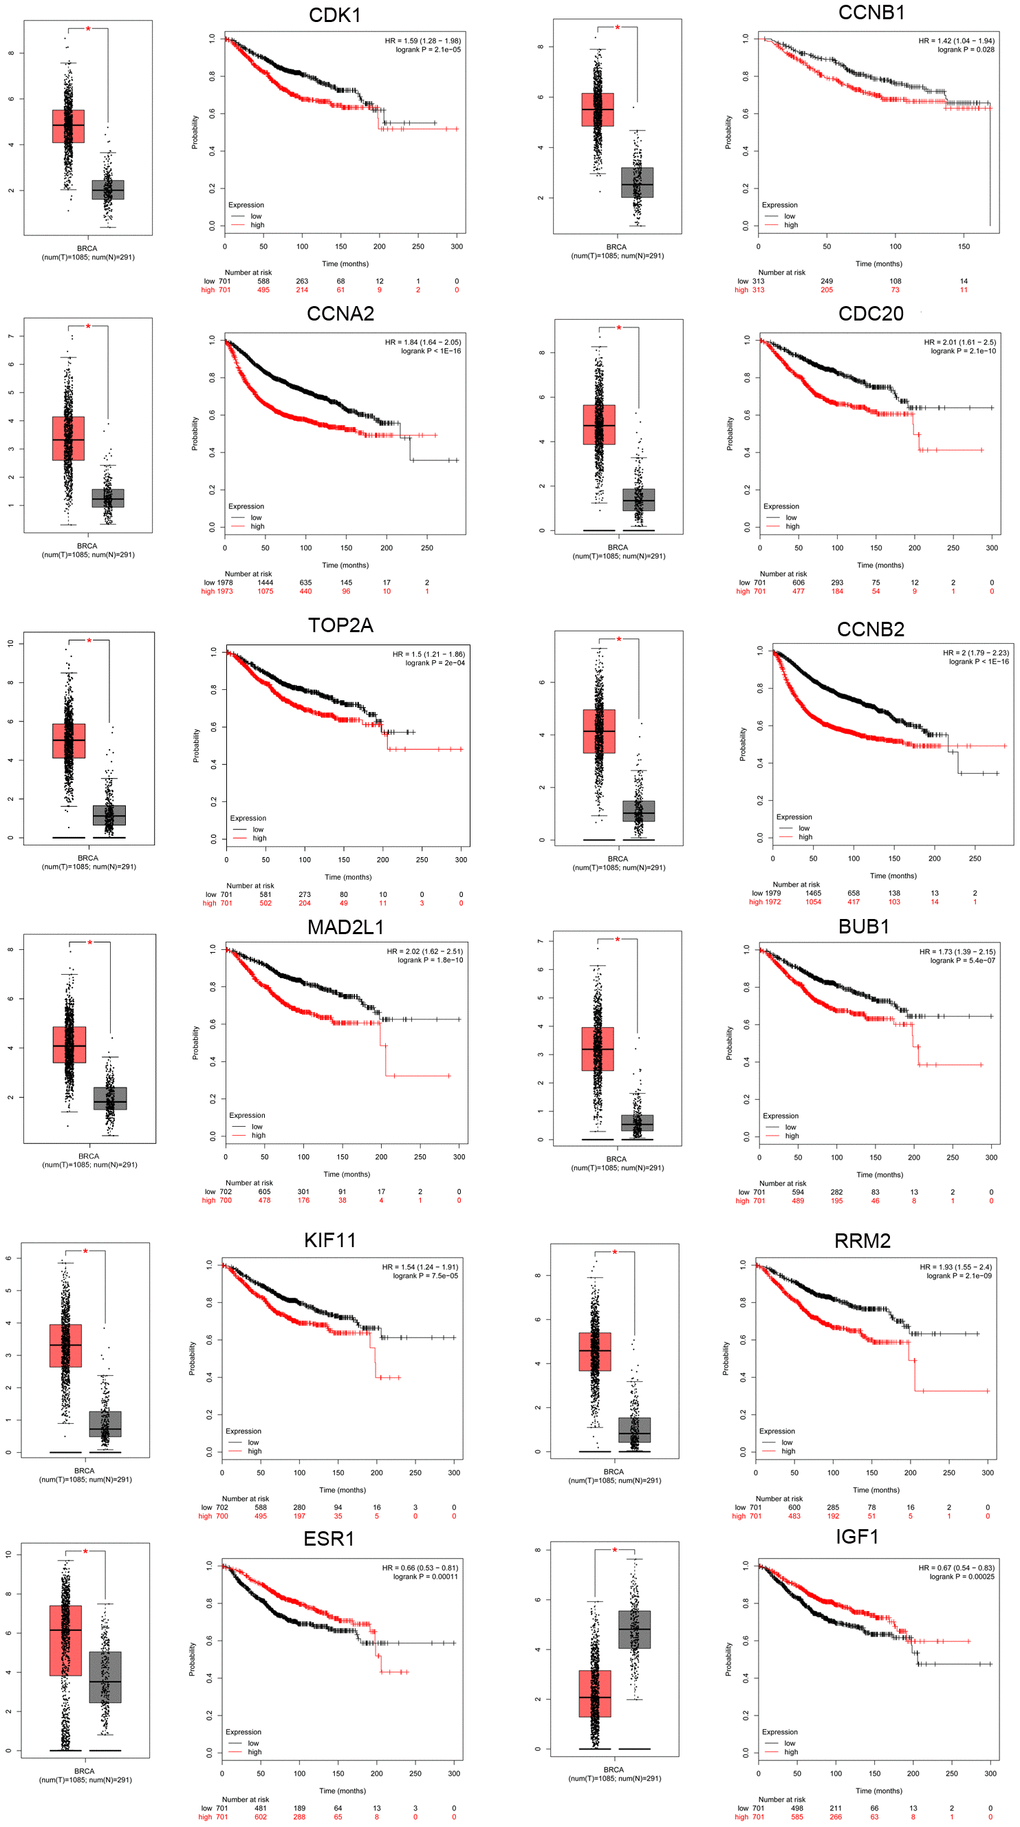 Screening of key genes in TNBC. Key genes were identified from the top 10 hub genes of the significant dysregulated DE-mRNAs by merging the prognosis and expression analyses using Kaplan Meier-plotter and GEPIA databases. Expression boxplots and survival curves (overall survival [OS]) of 12 key genes, including 10 upregulated hub genes (CDK1, CCNB1, CCNA2, CDC20, TOP2A, CCNB2, MAD2L1, BUB1, KIF11, and RRM2) and two downregulated hub genes (ESR1 and IGF1) in TNBC are presented.